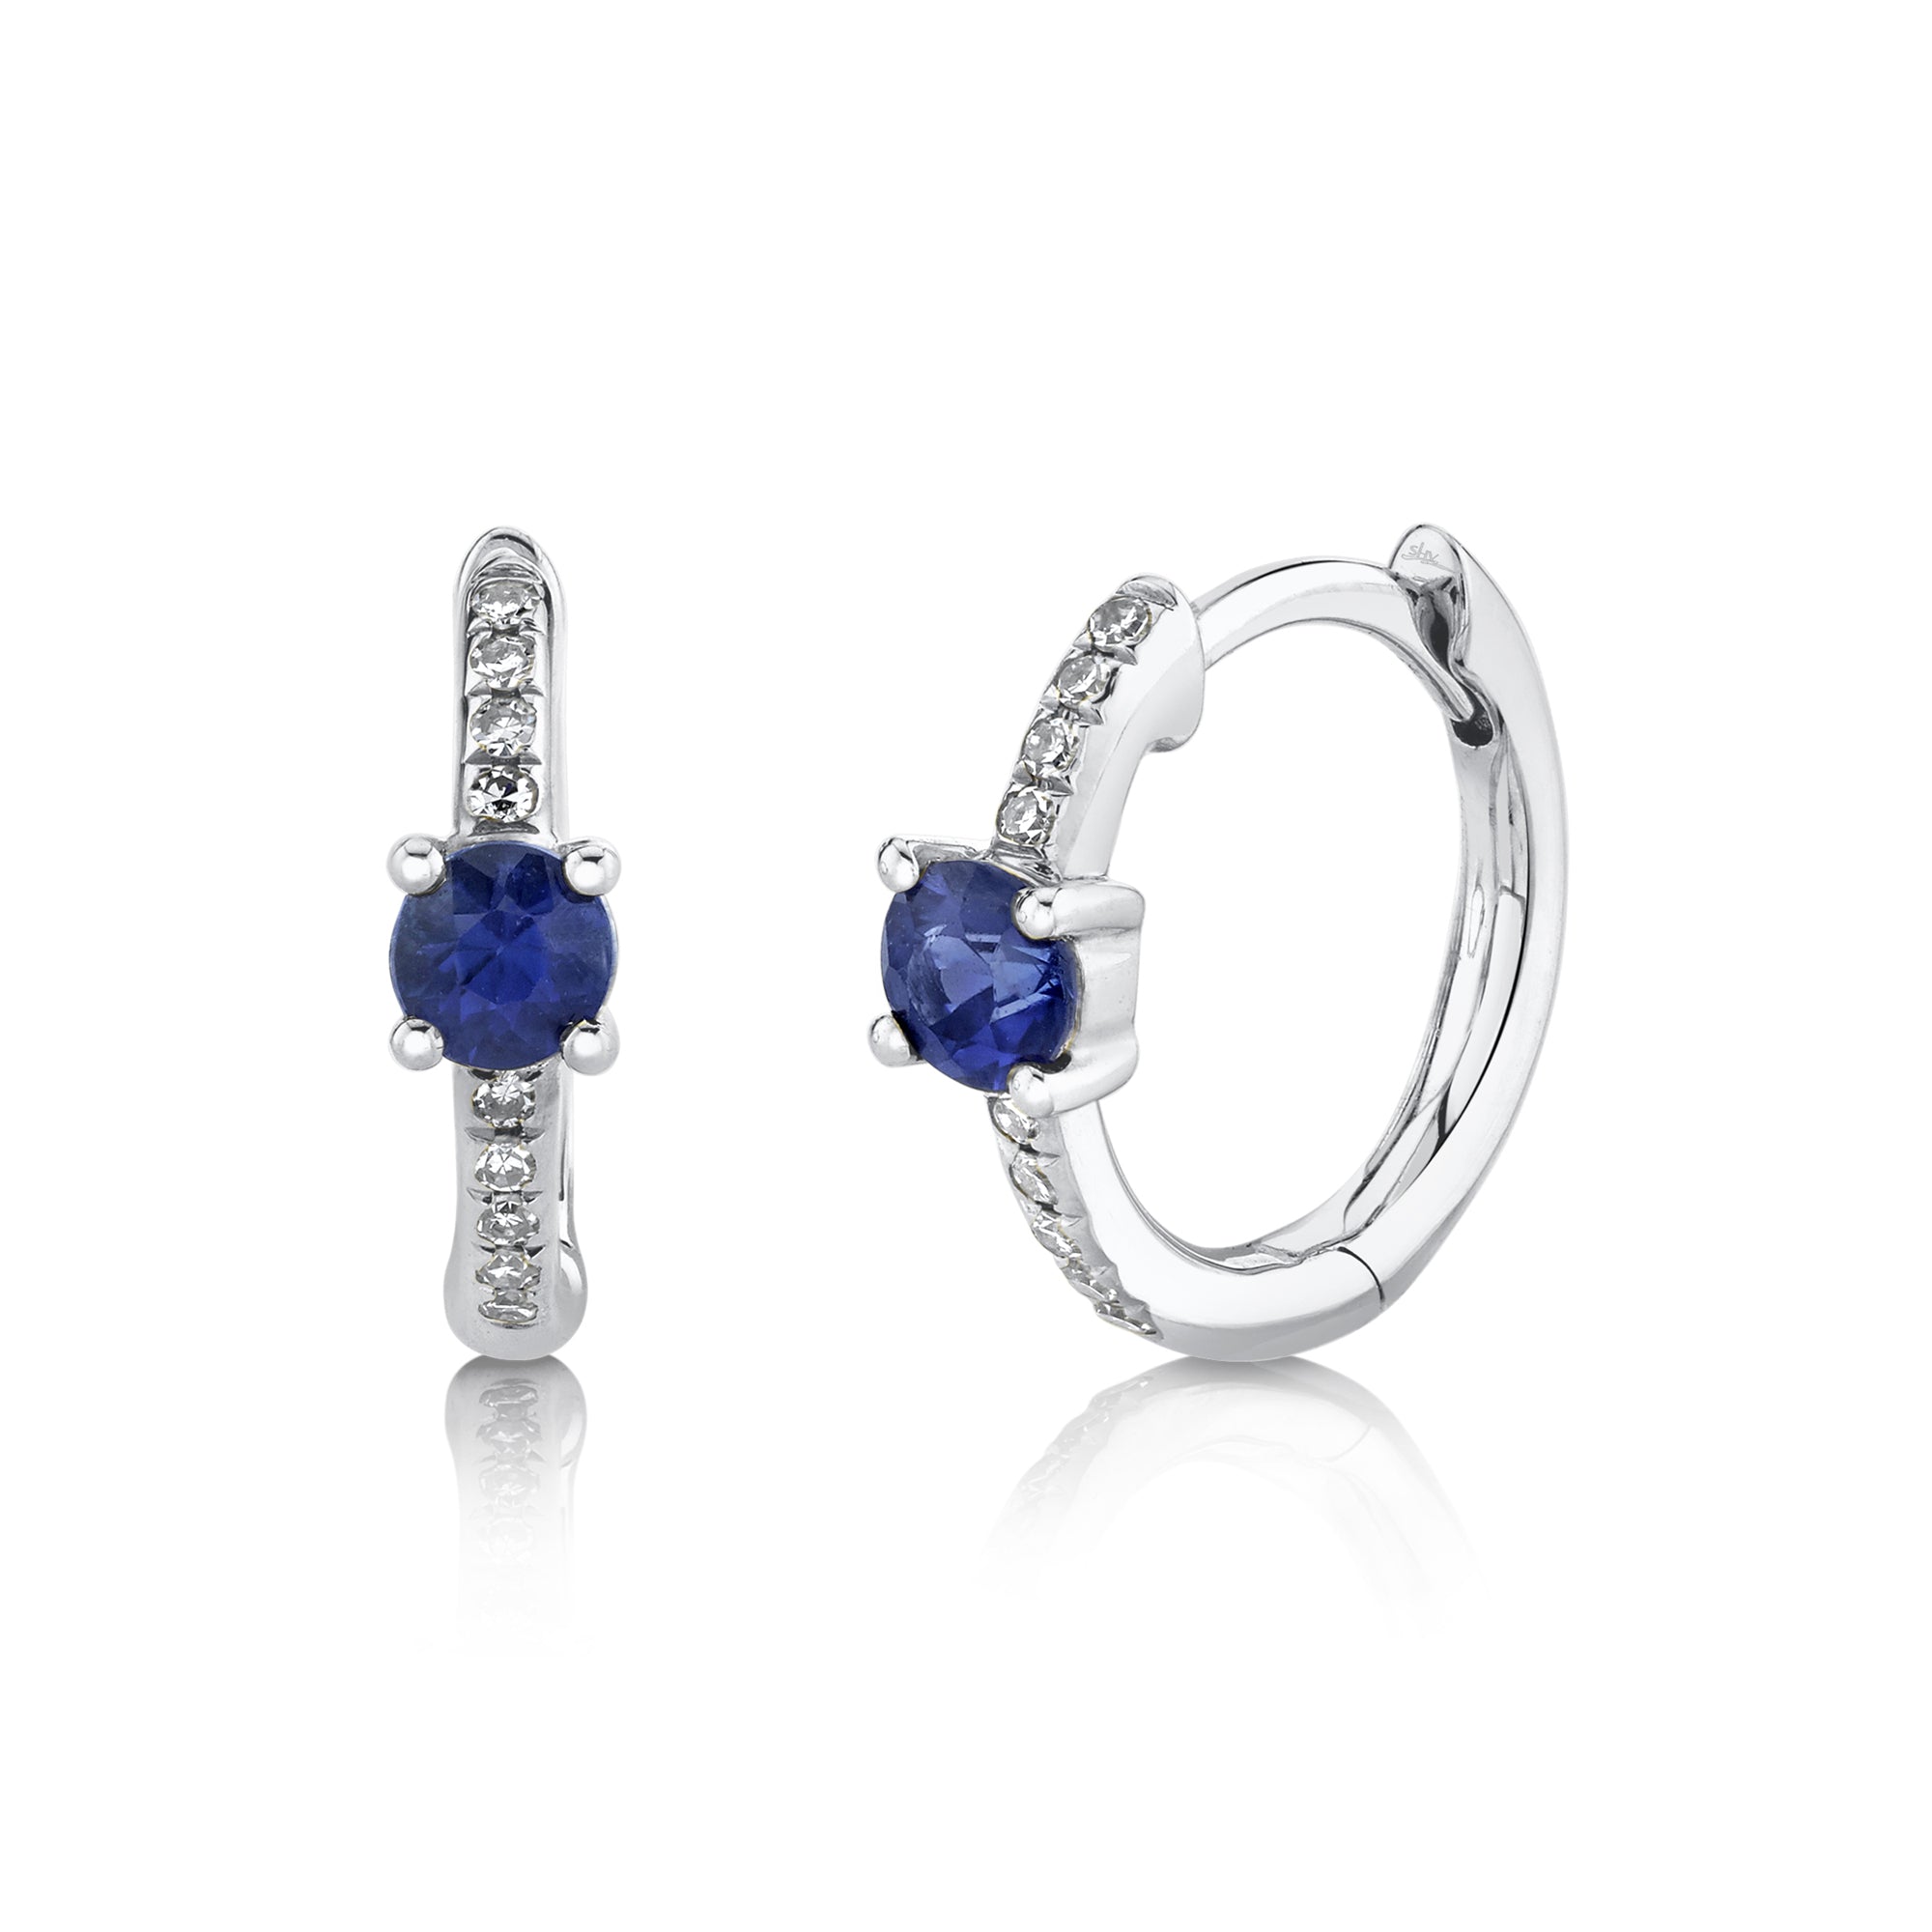 White Gold Pave Diamond and Sapphire Huggie Earrings Earrings Gift Giving